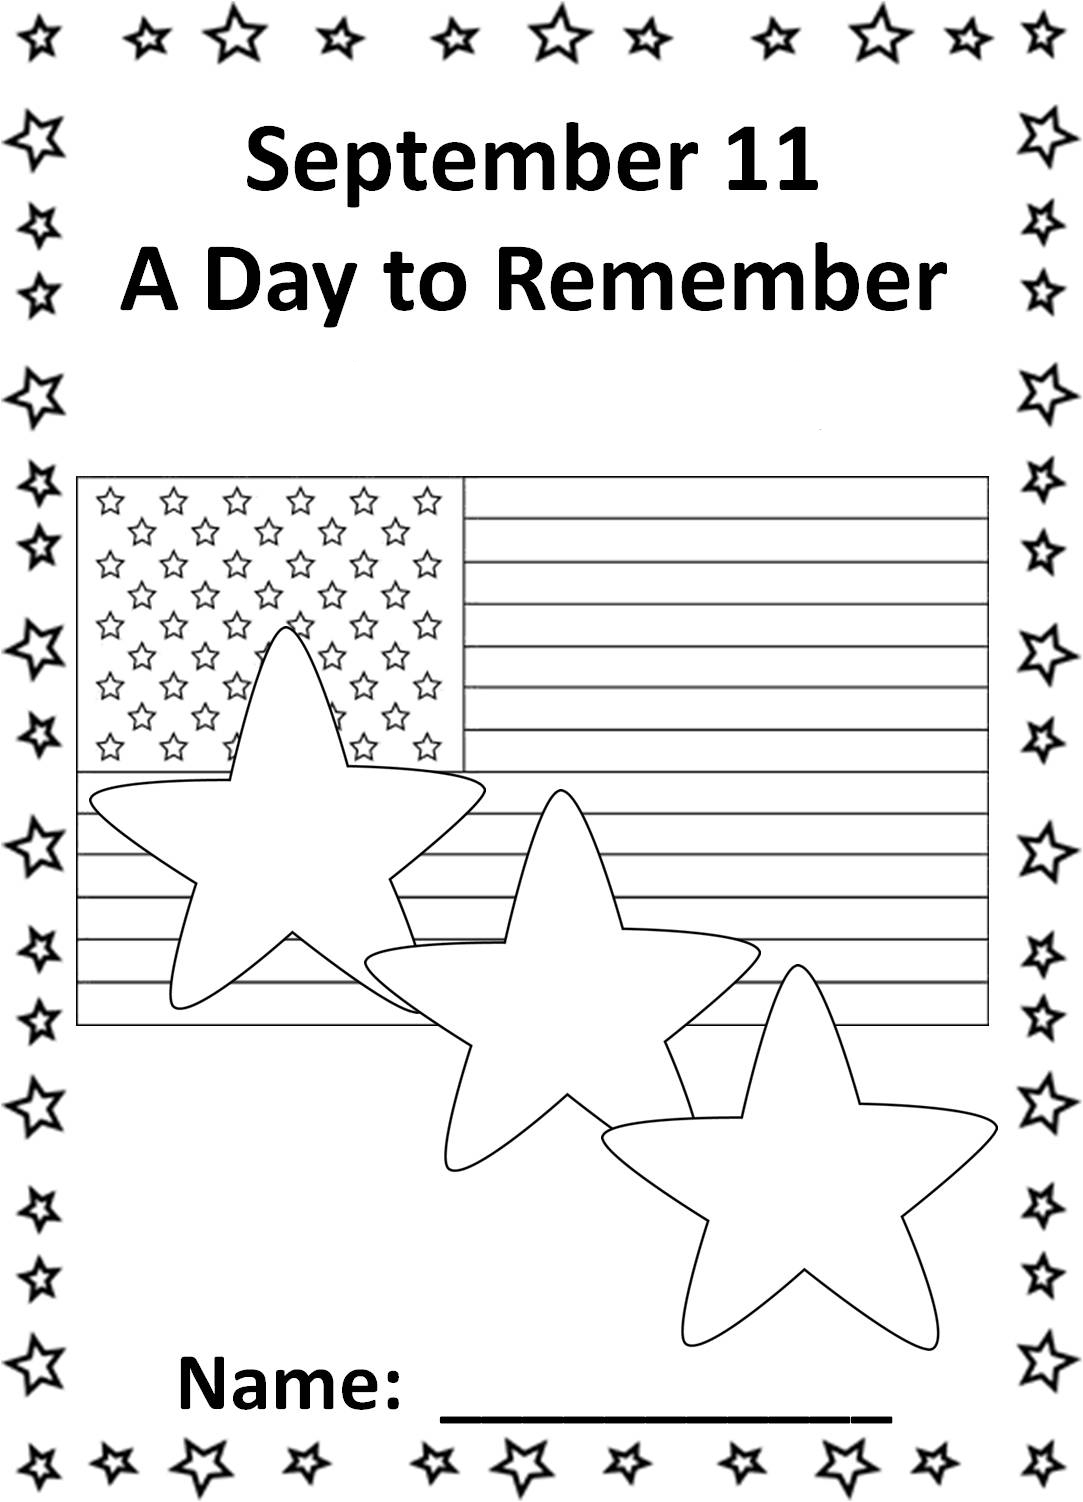 Coloring Pages For September 911 Coloring Pages Patriots Day Best Coloring Pages For Kids